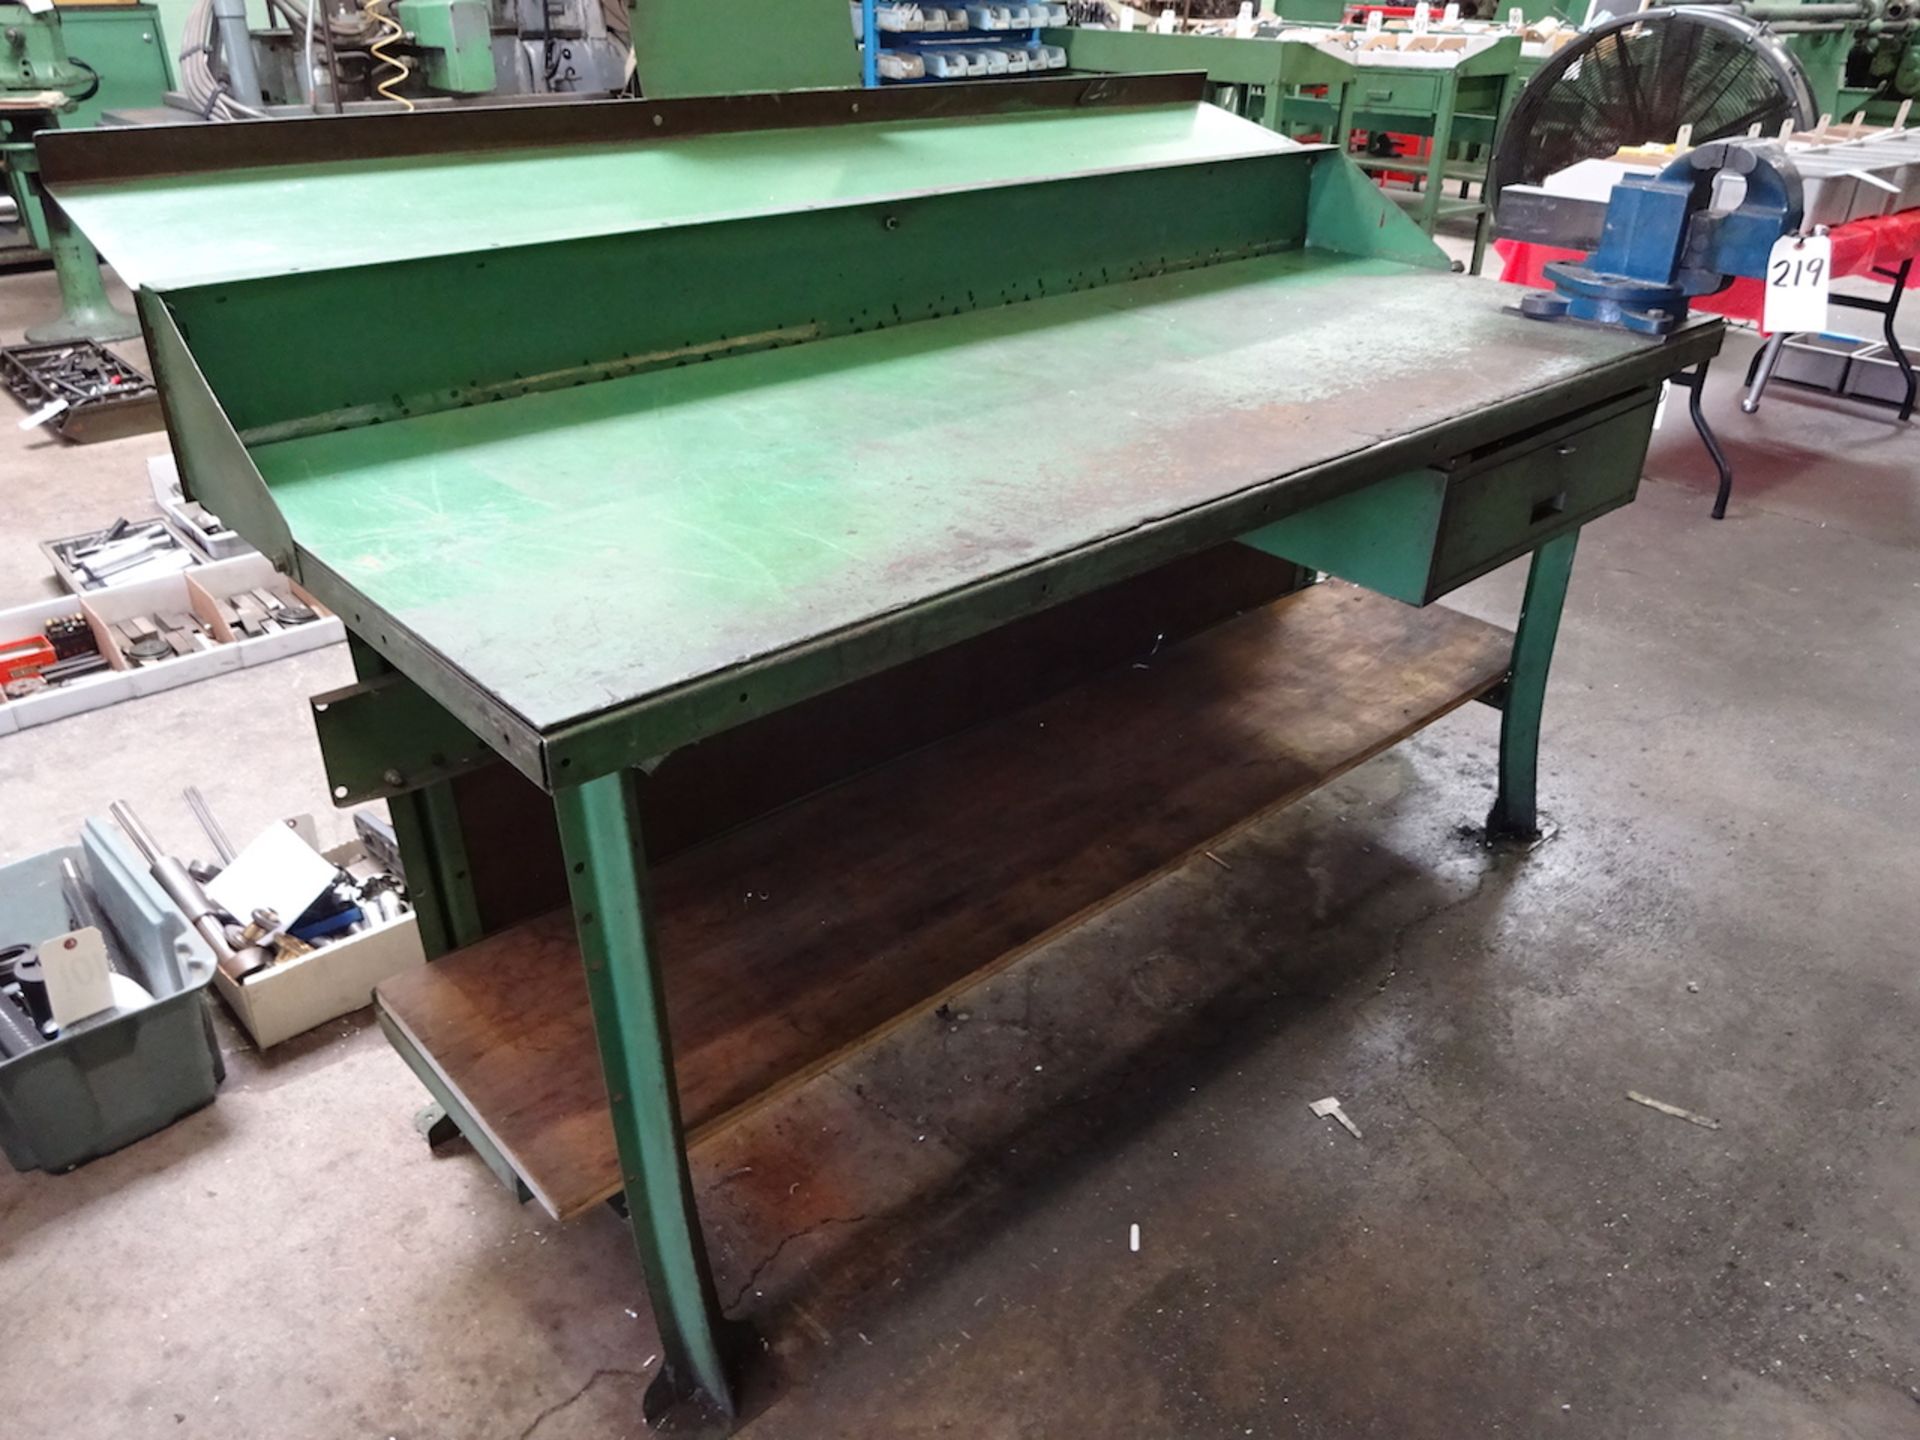 28 X 72 STEEL WORK BENCH WITH 4 IN VISE